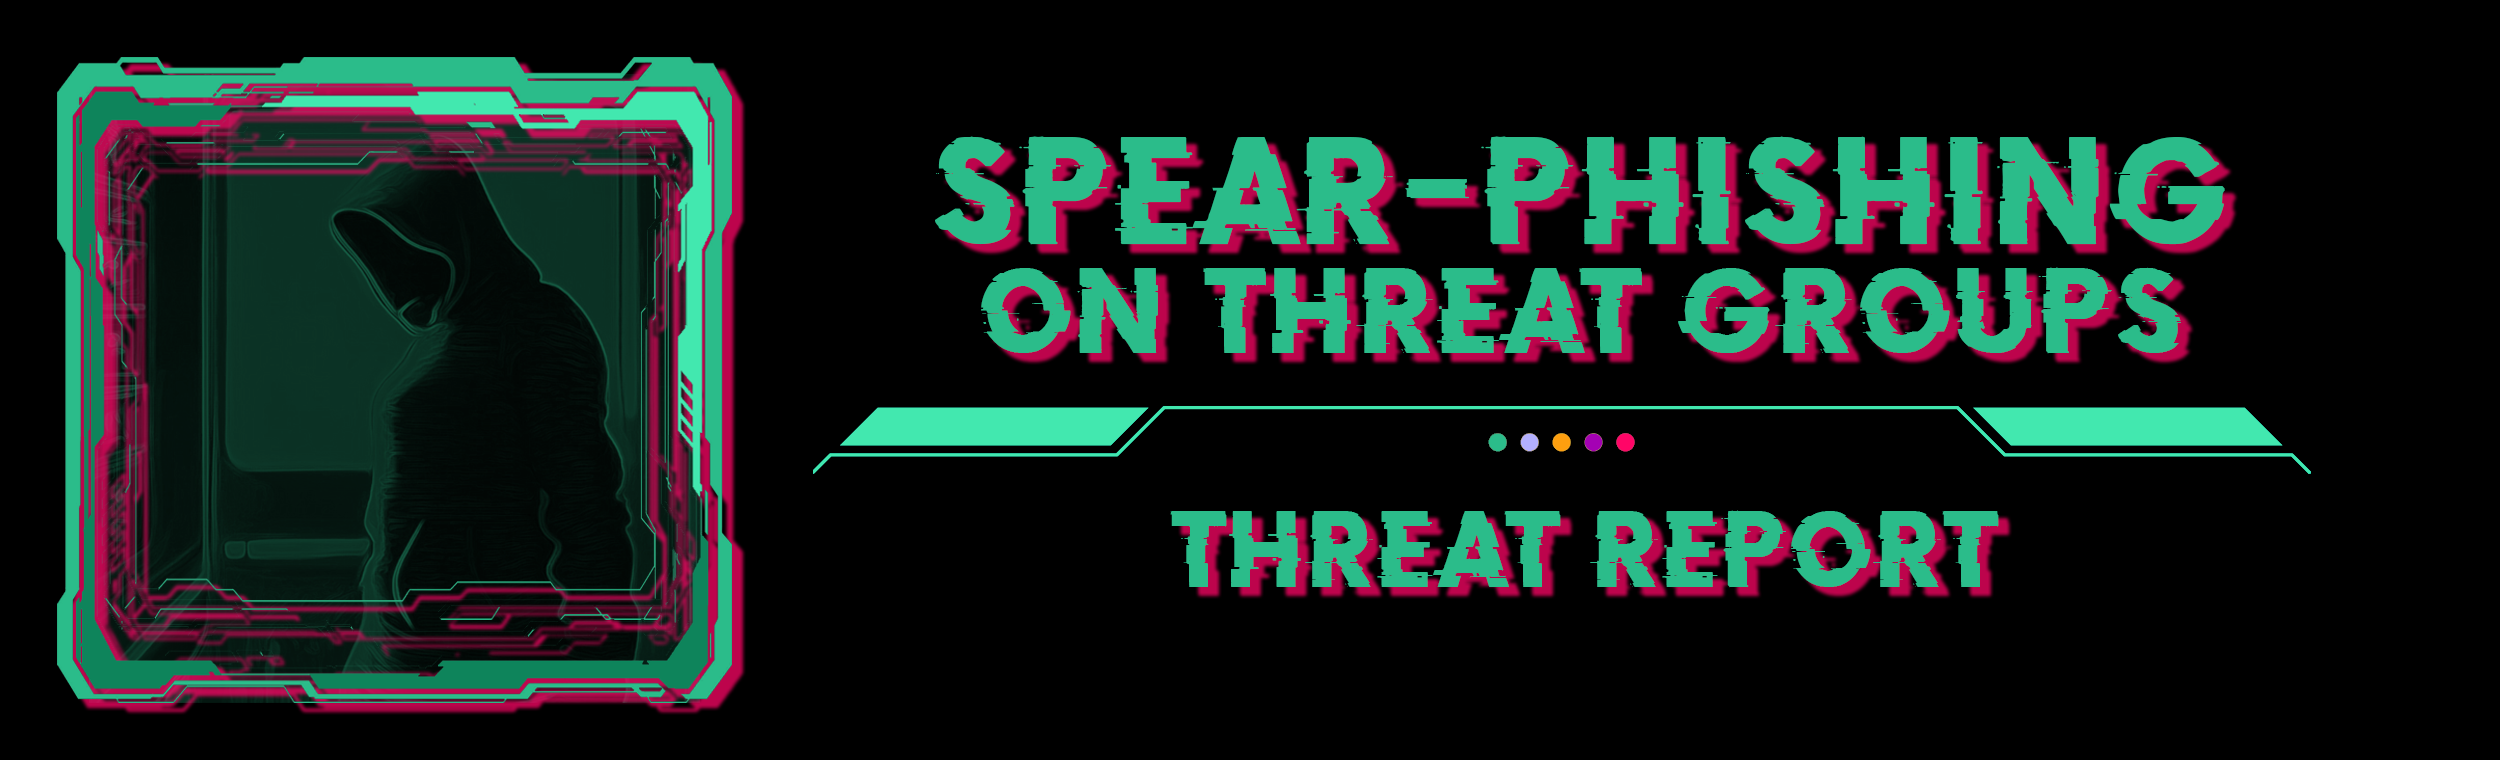 Evolution of Spear-Phishing techinques of Notorious Threat Groups